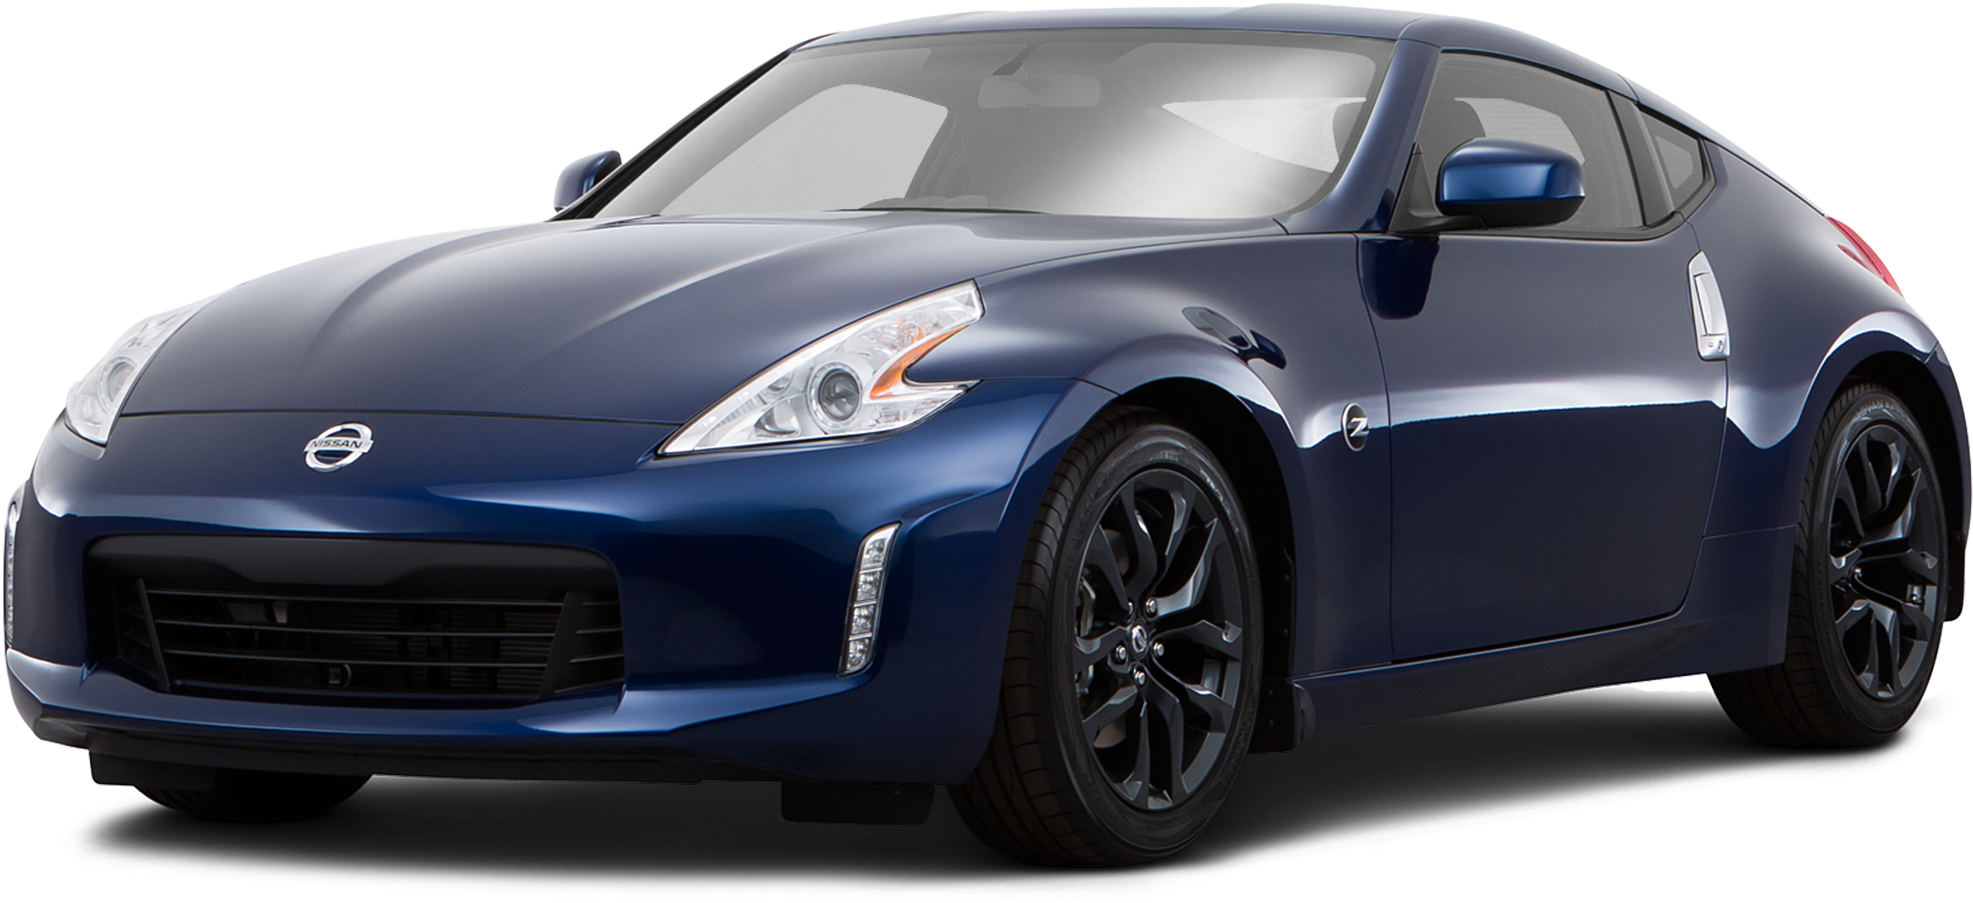 2019 Nissan 370z Coupe - Mazda 3 (2080x957), Png Download